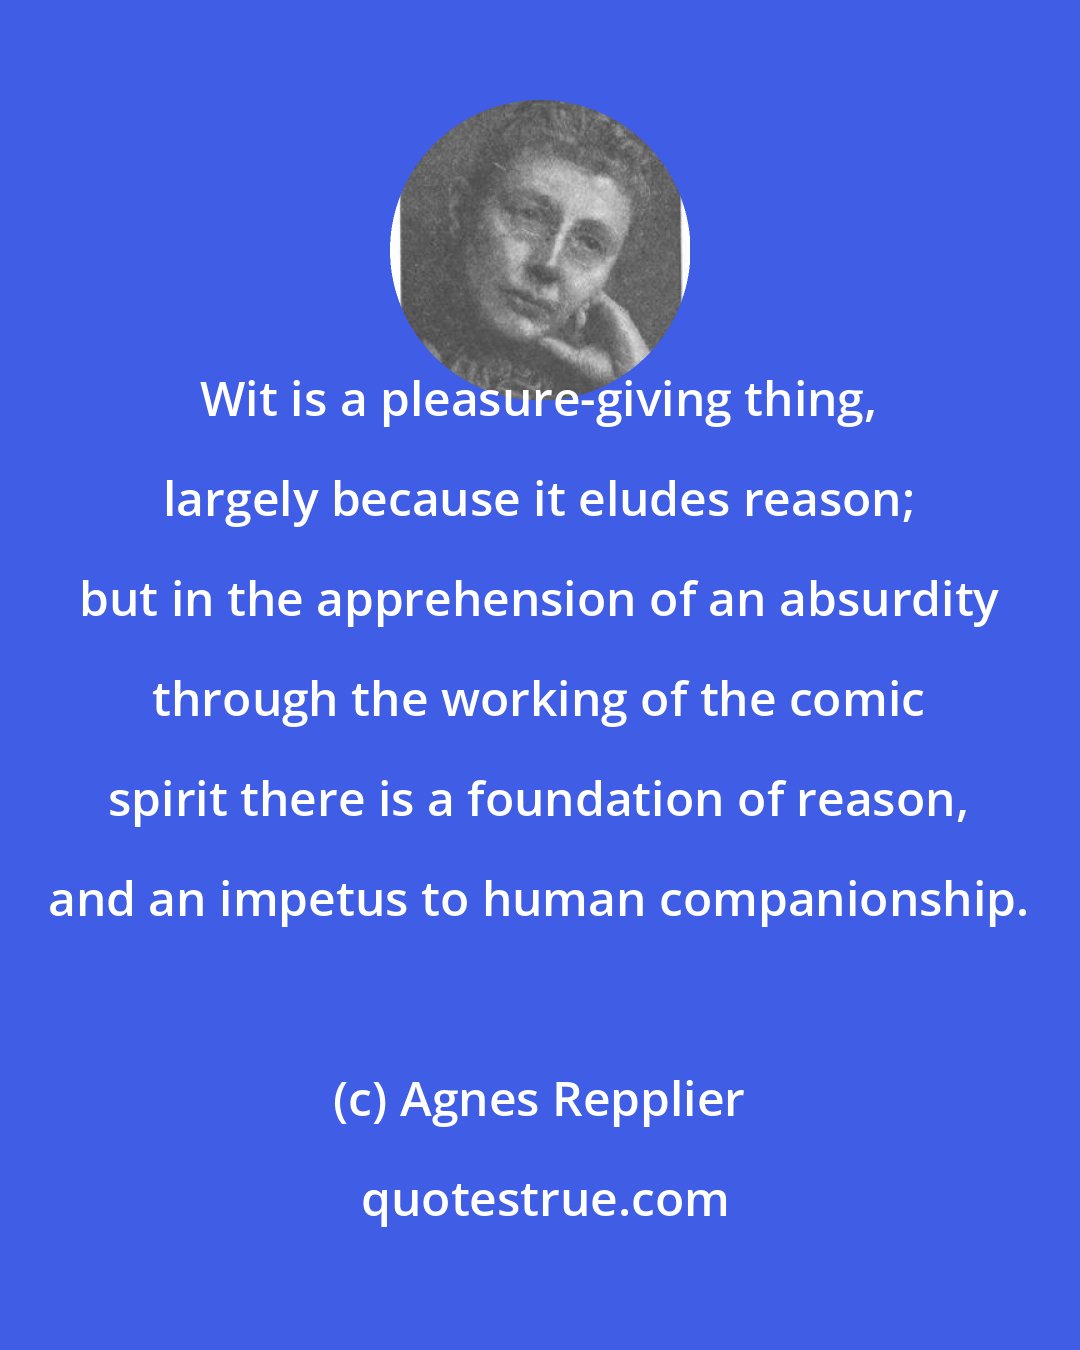 Agnes Repplier: Wit is a pleasure-giving thing, largely because it eludes reason; but in the apprehension of an absurdity through the working of the comic spirit there is a foundation of reason, and an impetus to human companionship.